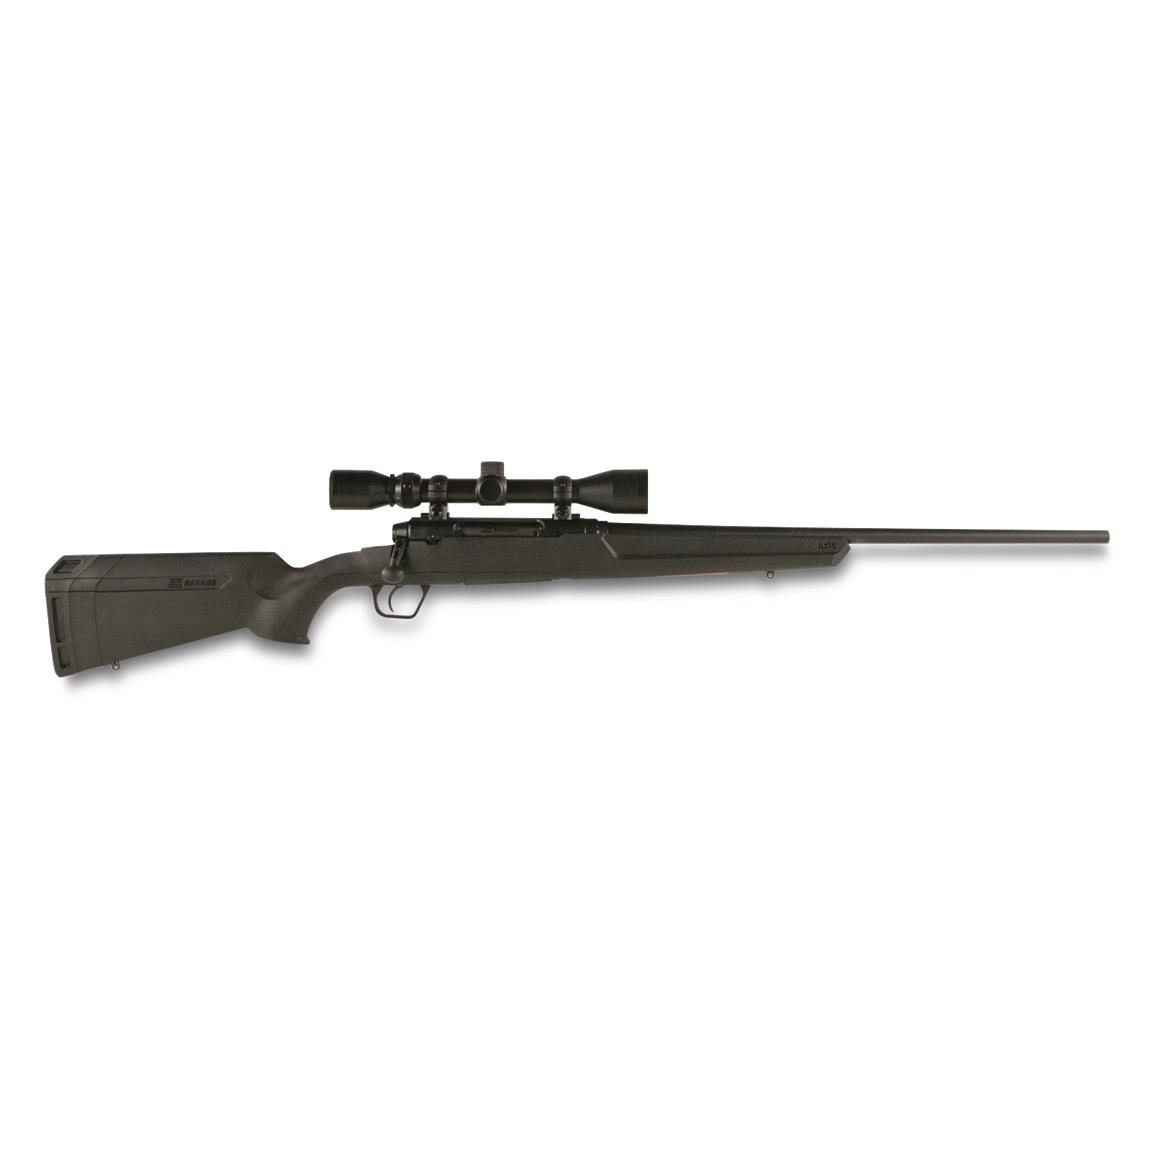 Savage Axis XP Compact, Bolt Action, 6.5mm Creedmoor, 20" Barrel, 4+1 Rds., Weaver 3-9x40mm Scope